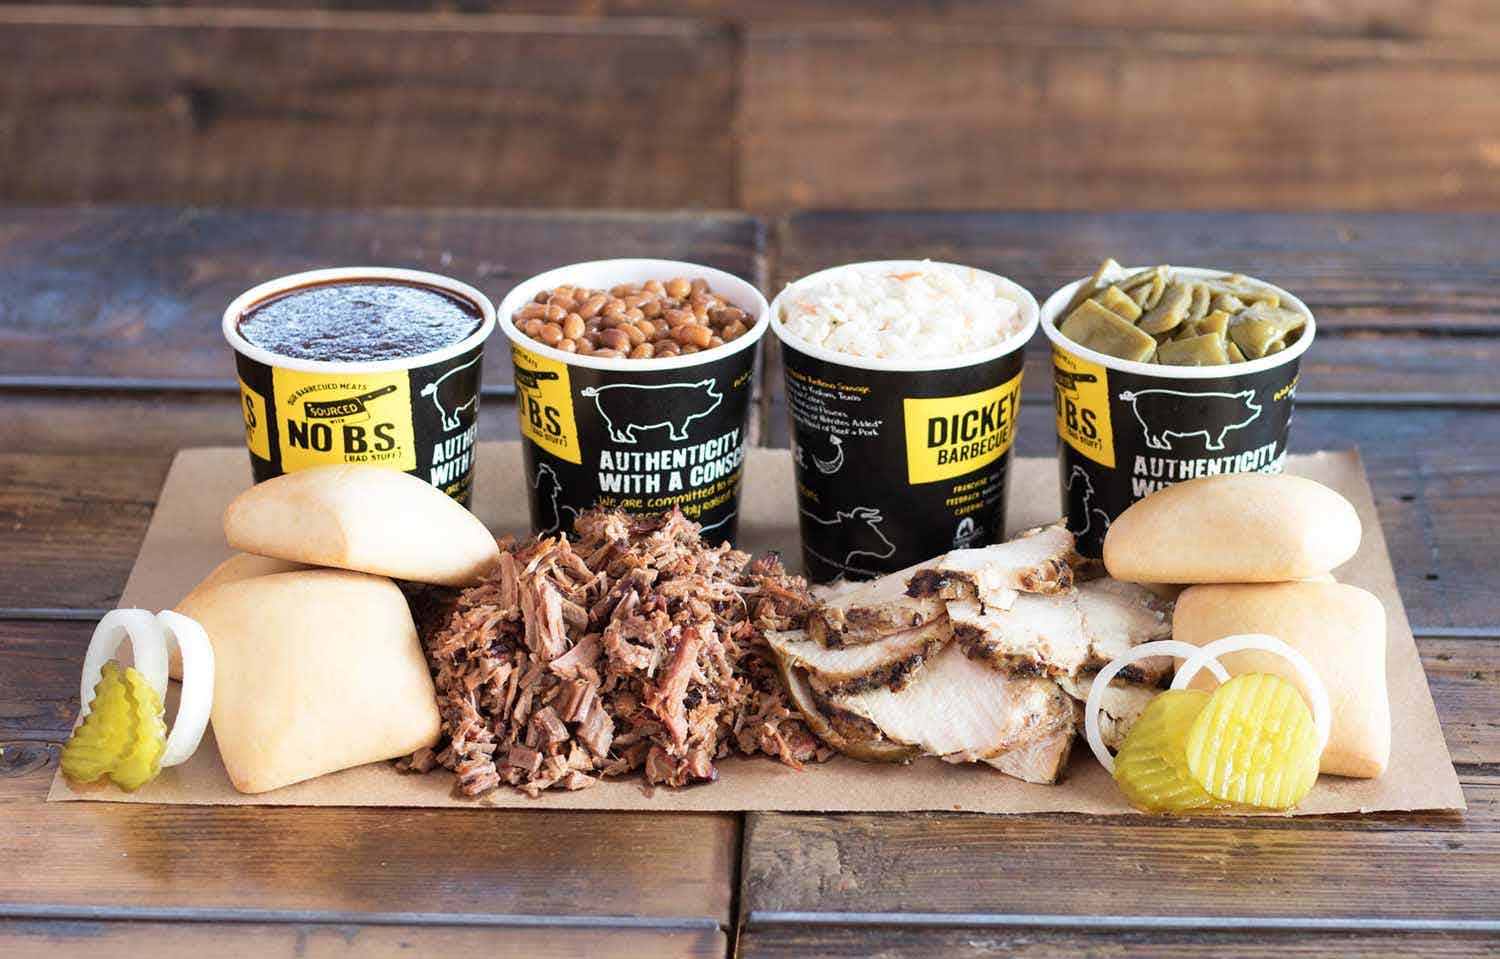 Fast Casual: Franchisee brings more Dickey's Barbecue Pits to Los Angeles